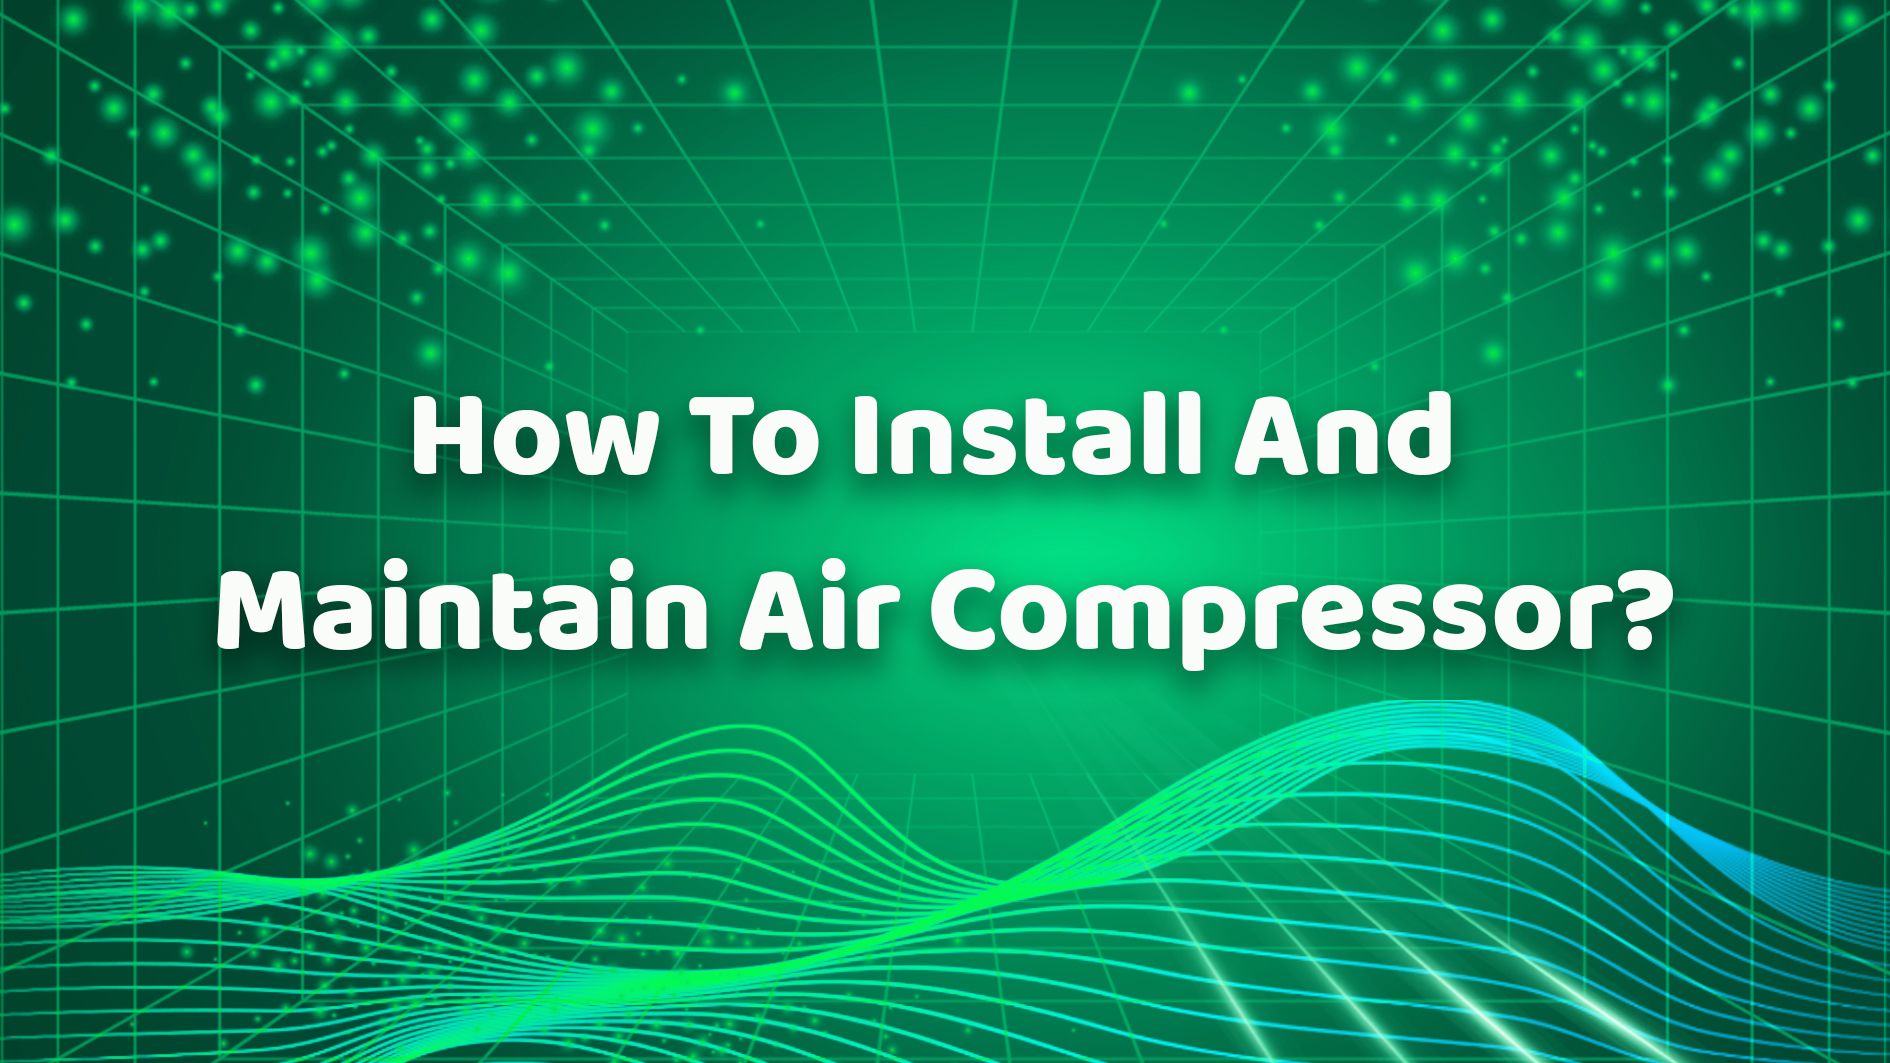 How To Install And Maintain Air Compressor？